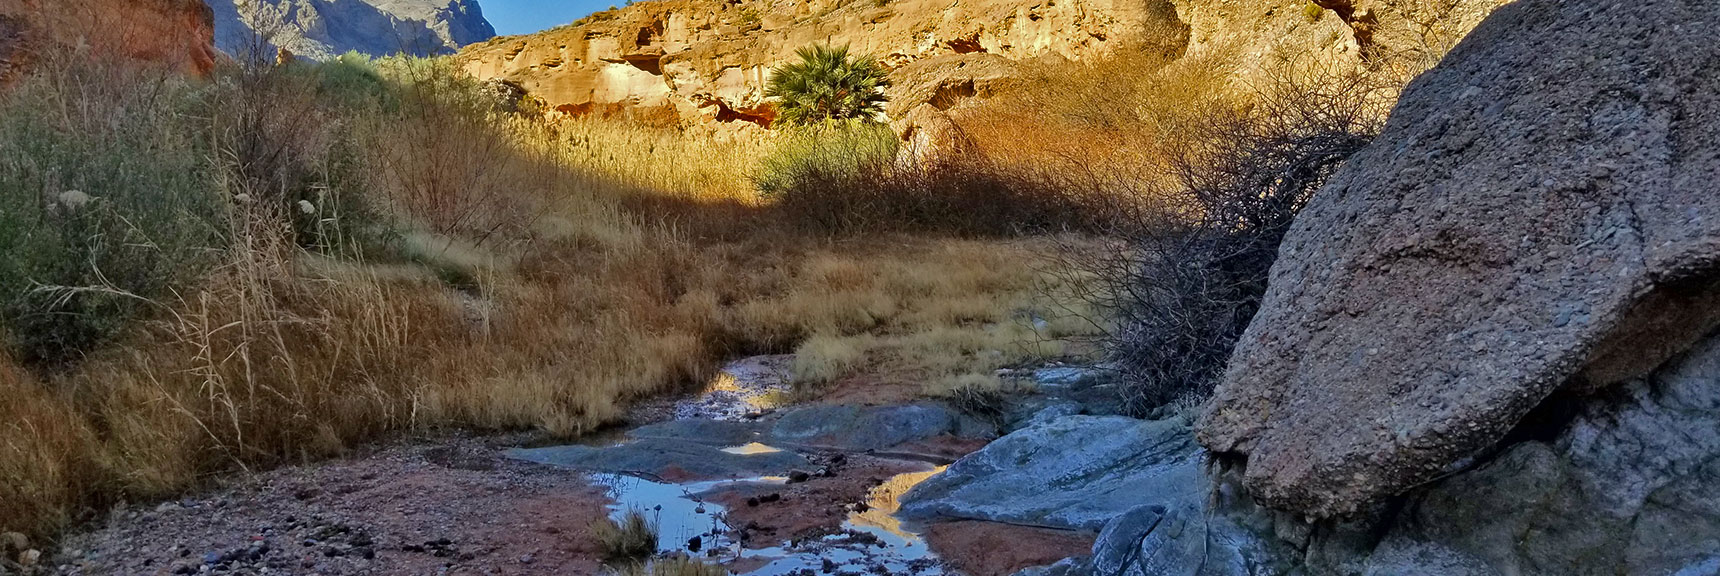 Charlie's Spring Oasis on Charlie's Spring Trail, Valley of Fire State Park, Nevada